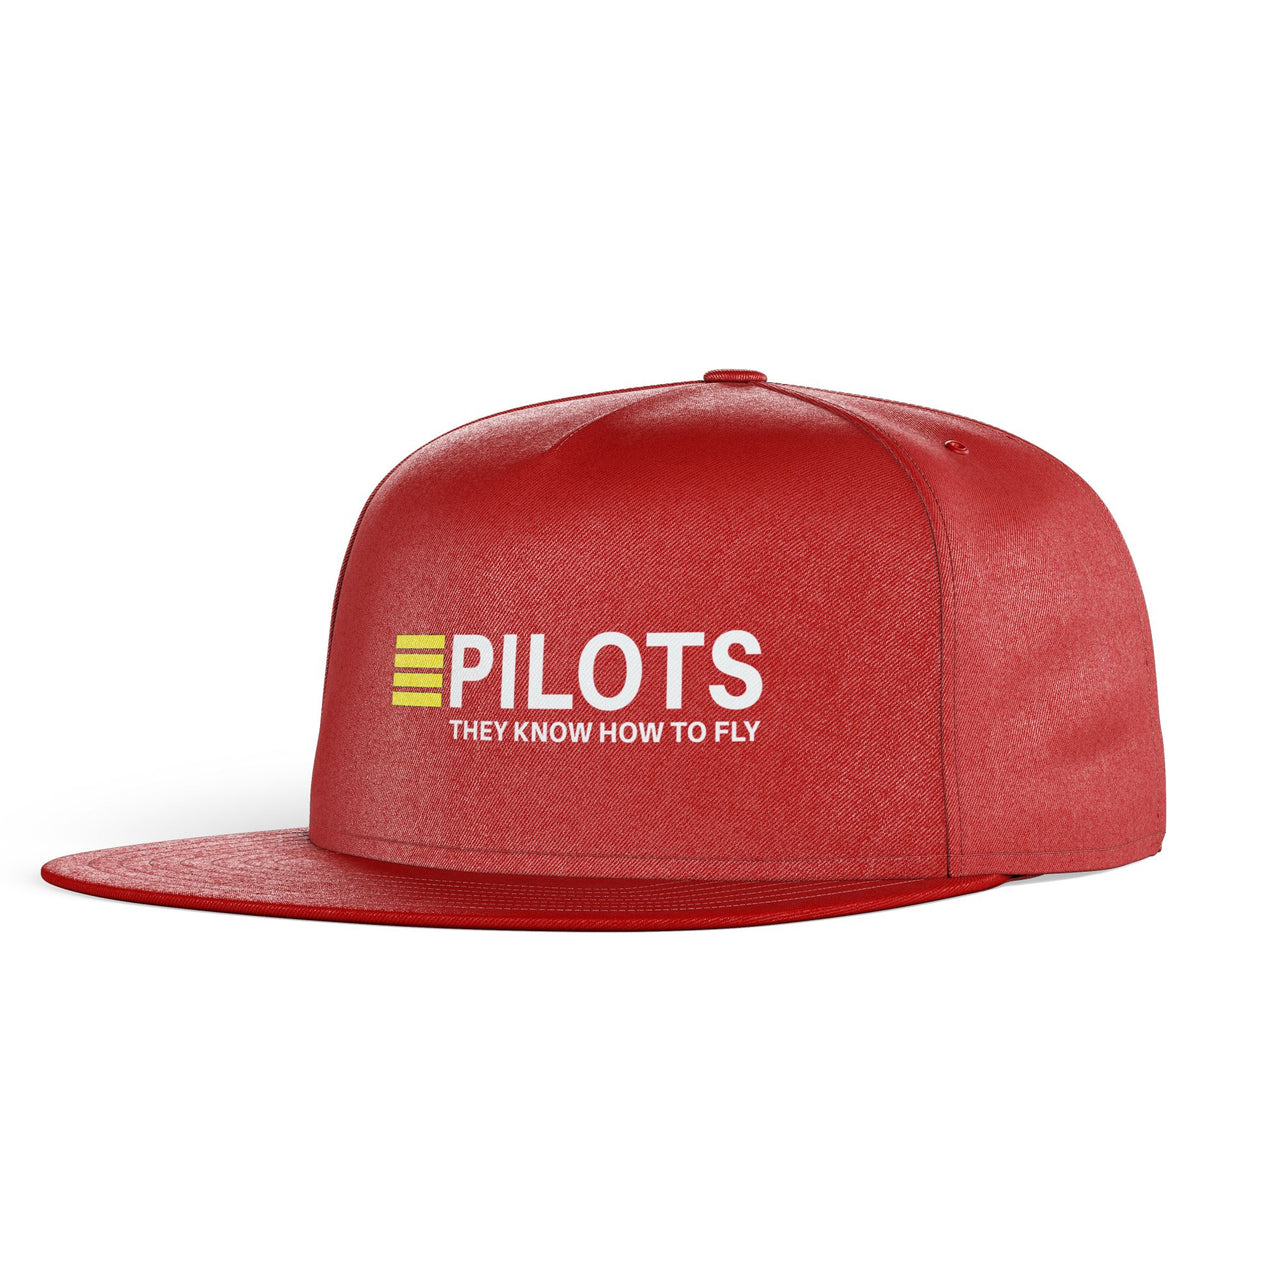 Pilots They Know How To Fly Designed Snapback Caps & Hats